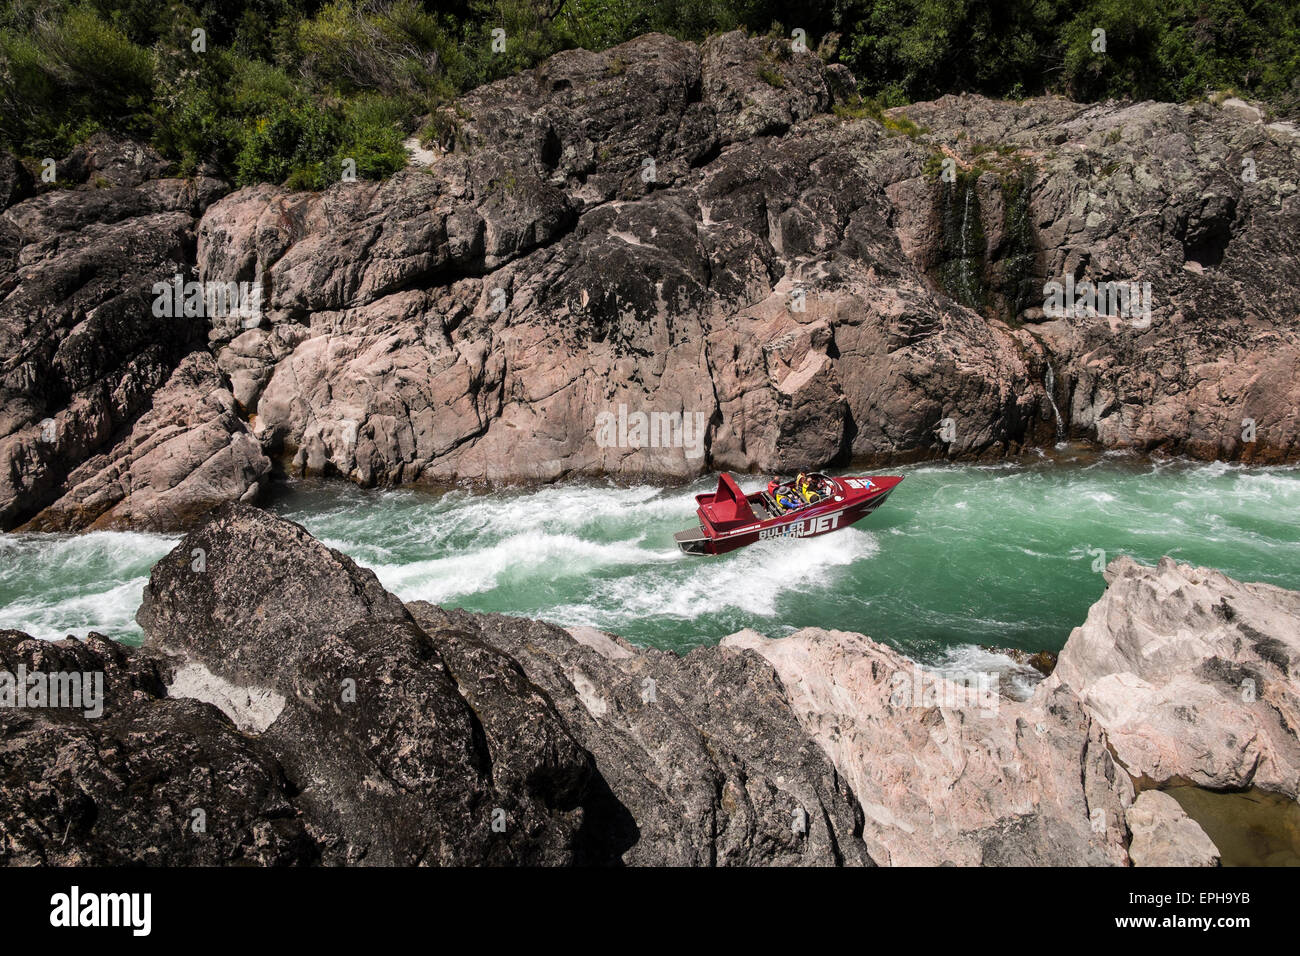 Buller Canyon Jet boat with tourists on a thrilling ride through a rocky ravine on the river, Murchison, New Zealand. Stock Photo